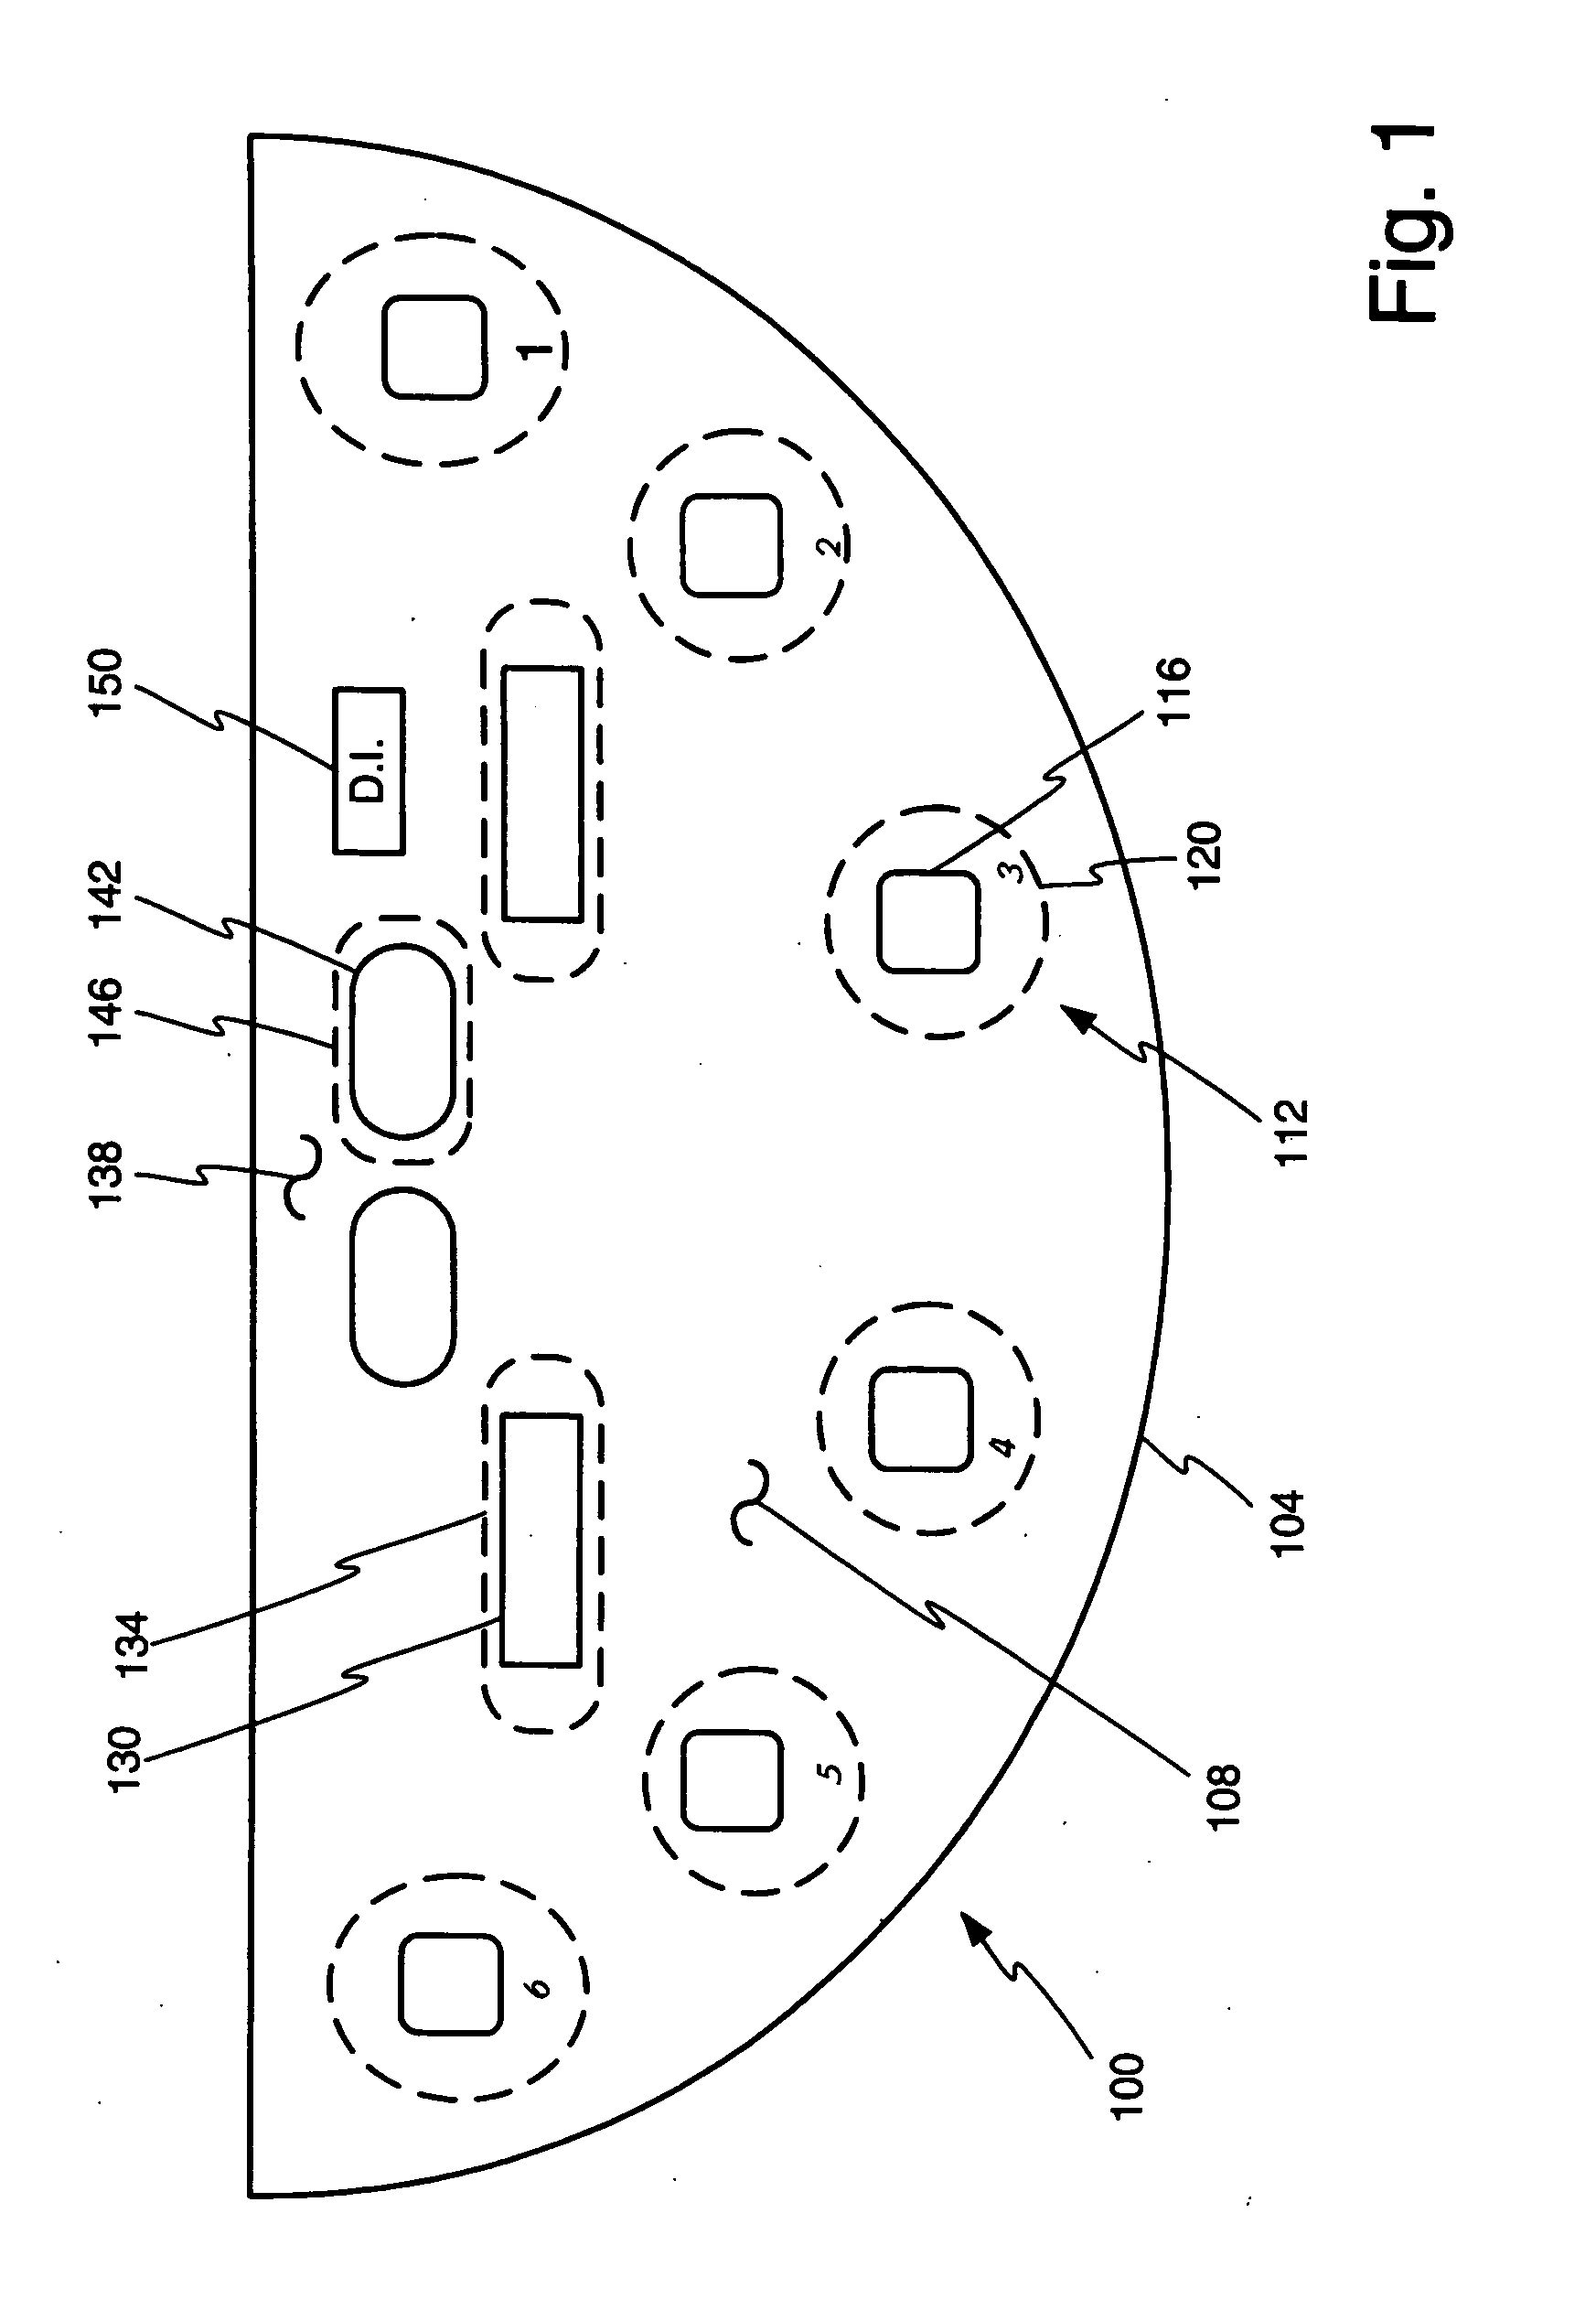 Method and apparatus for tracking play at a roulette table